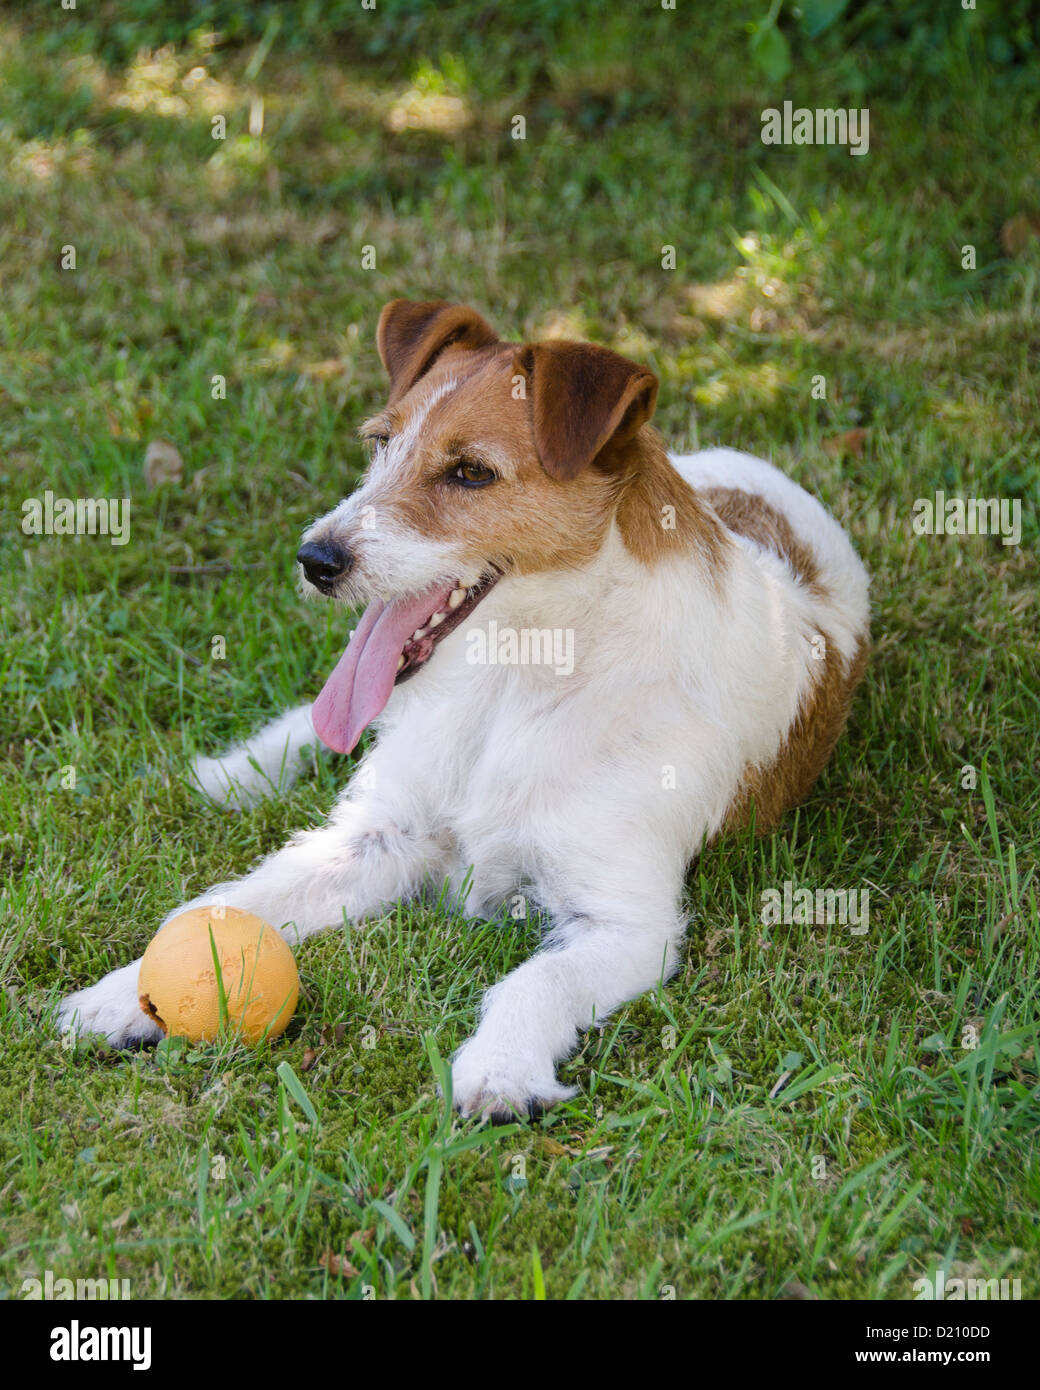 Parson Jack Russell Terrier Dog Stock Photo